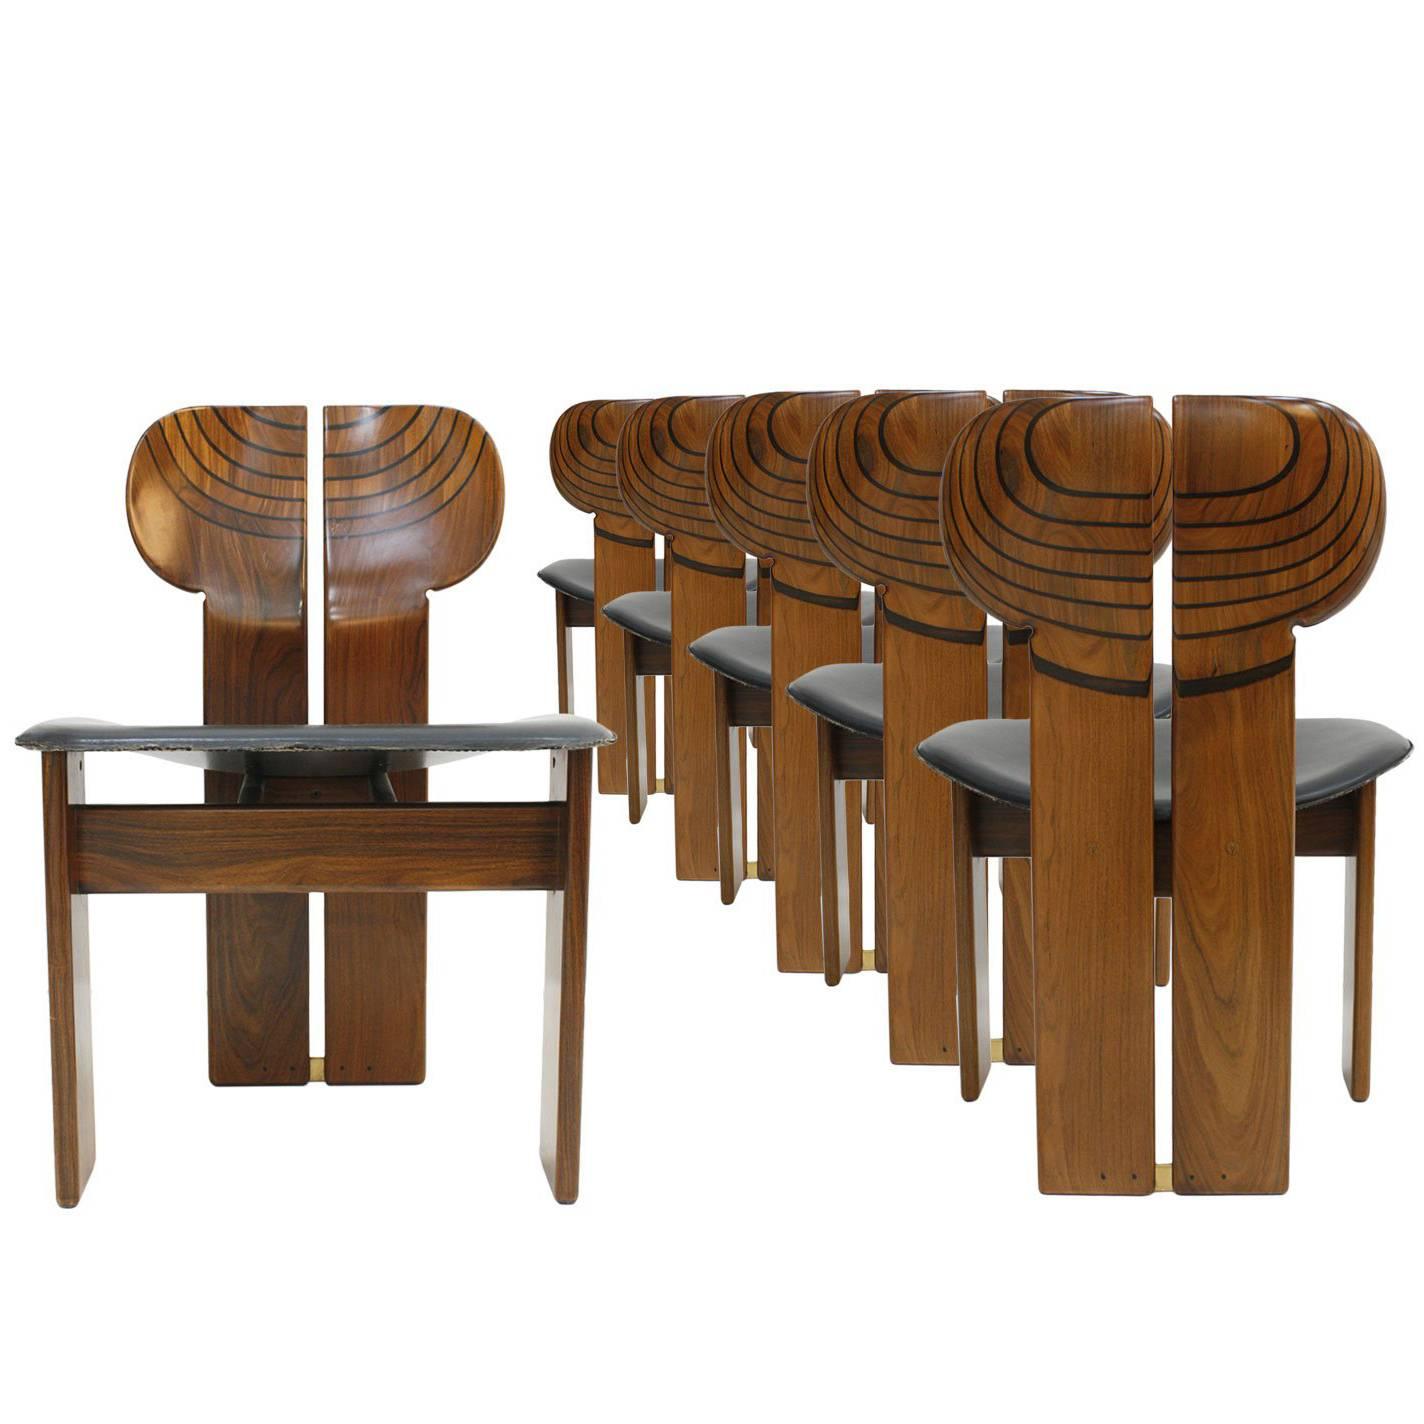 Set of Six "Africa" Chairs Designed by Afra and Tobia Scarpa and Edited, Maxalto